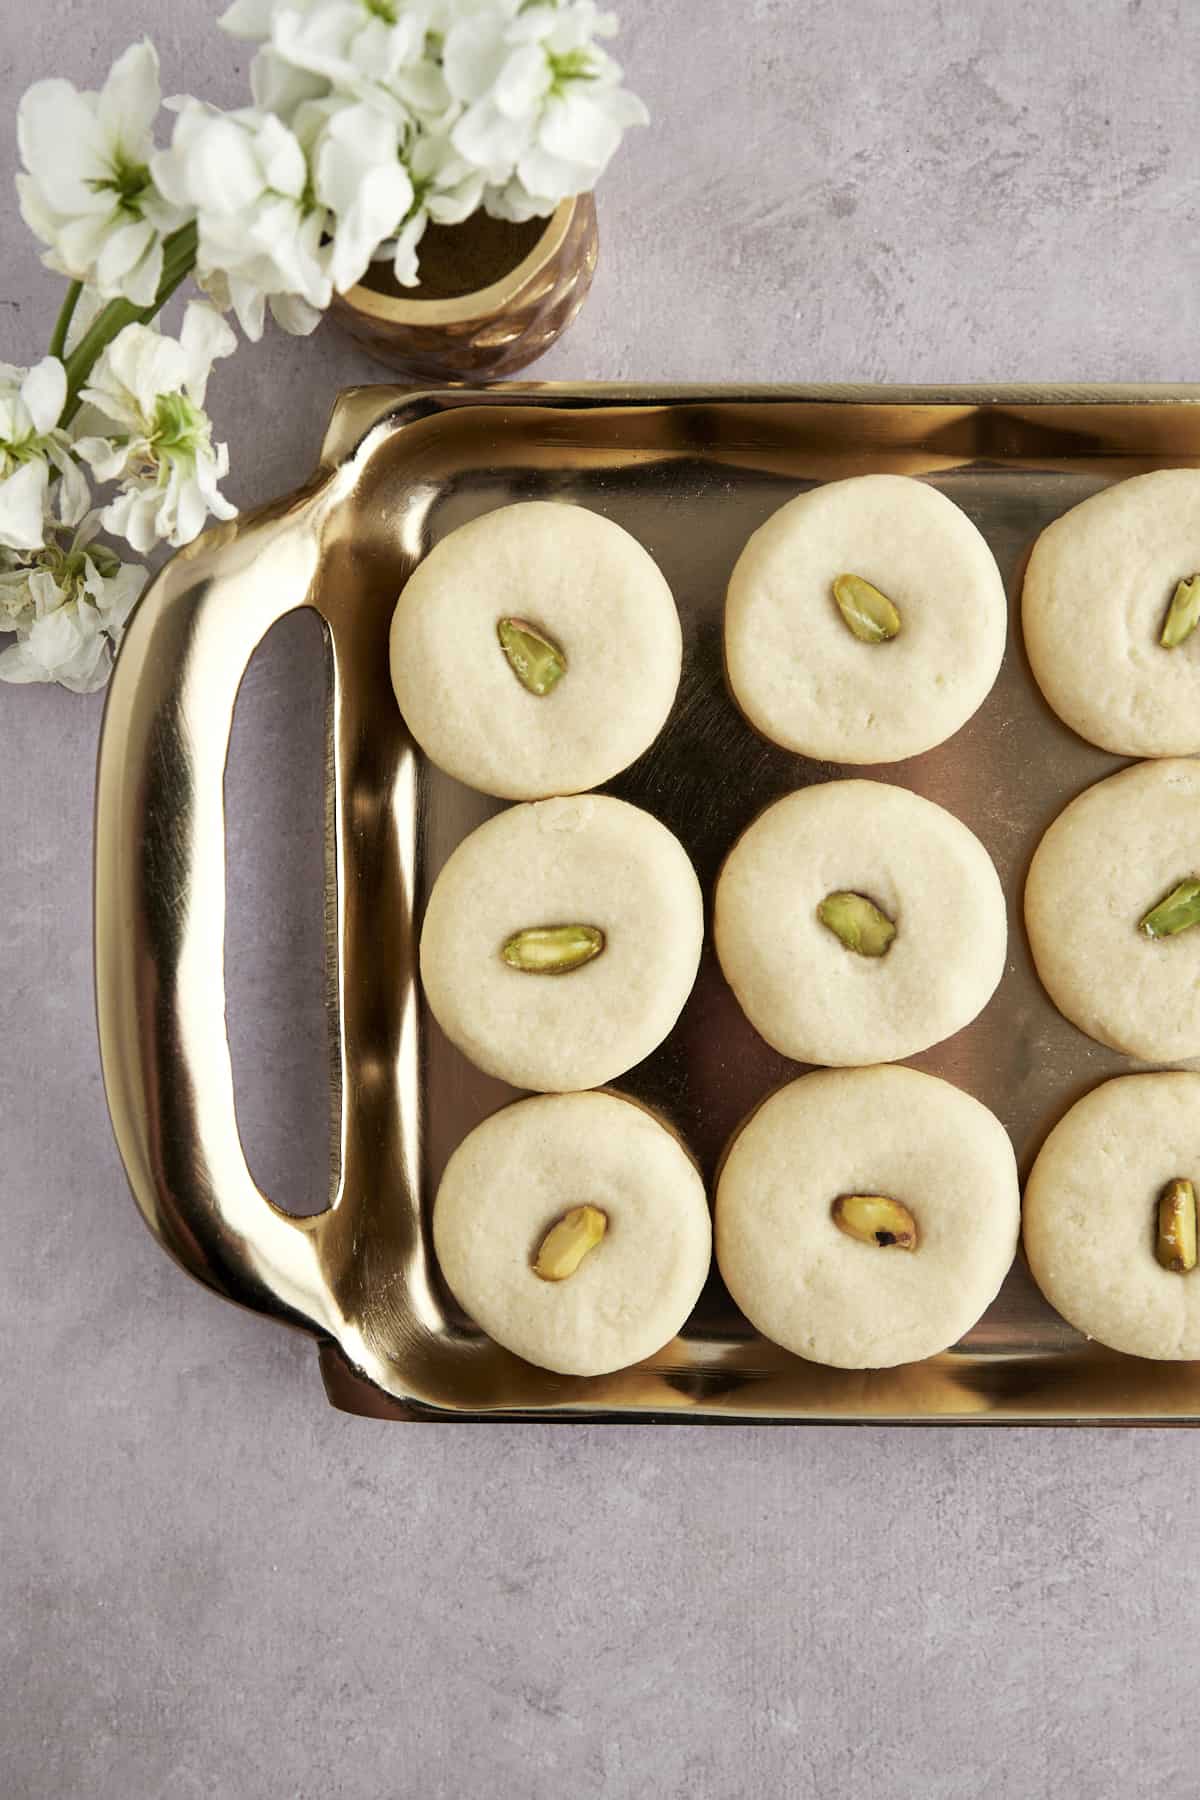 Ghraybeh (Middle Eastern Shortbread Cookies)